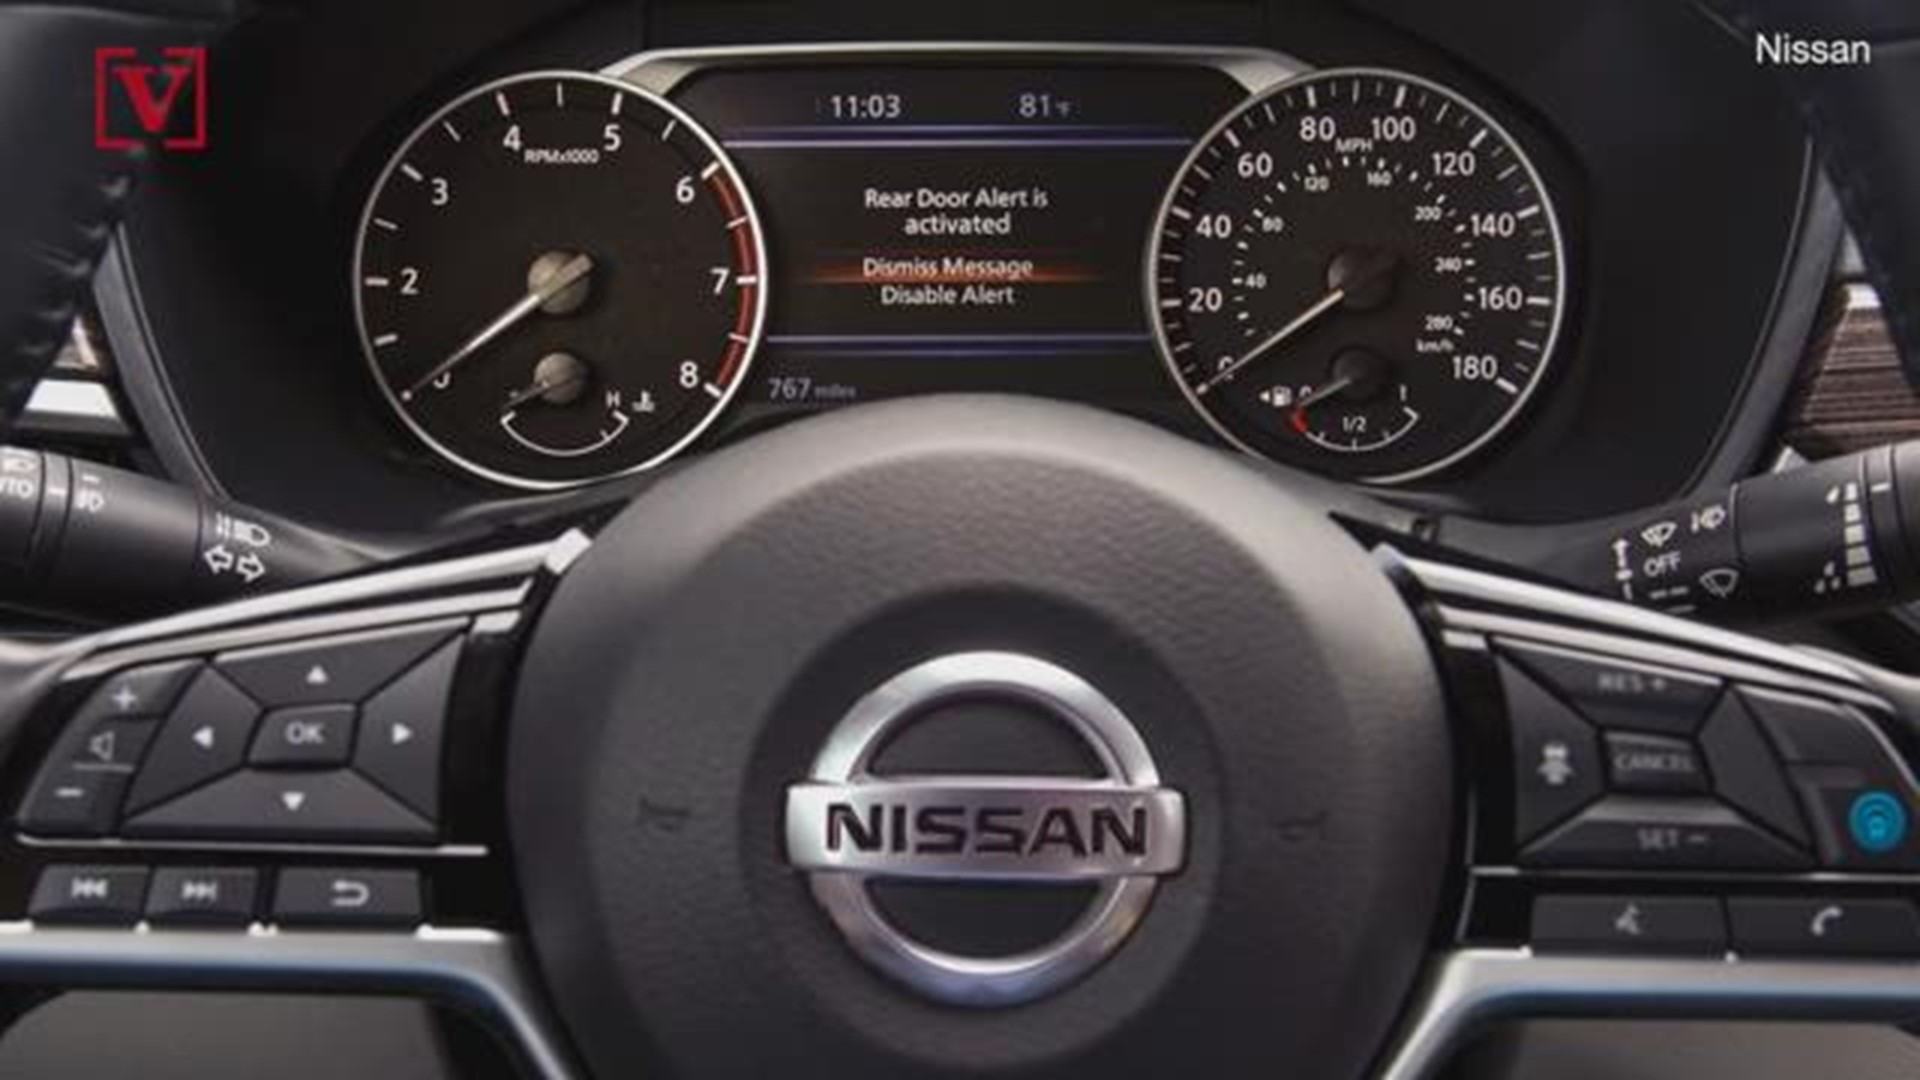 Nissan has announced that its system of reminding drivers to check the back seat for kids or pets after parking will soon become standard.